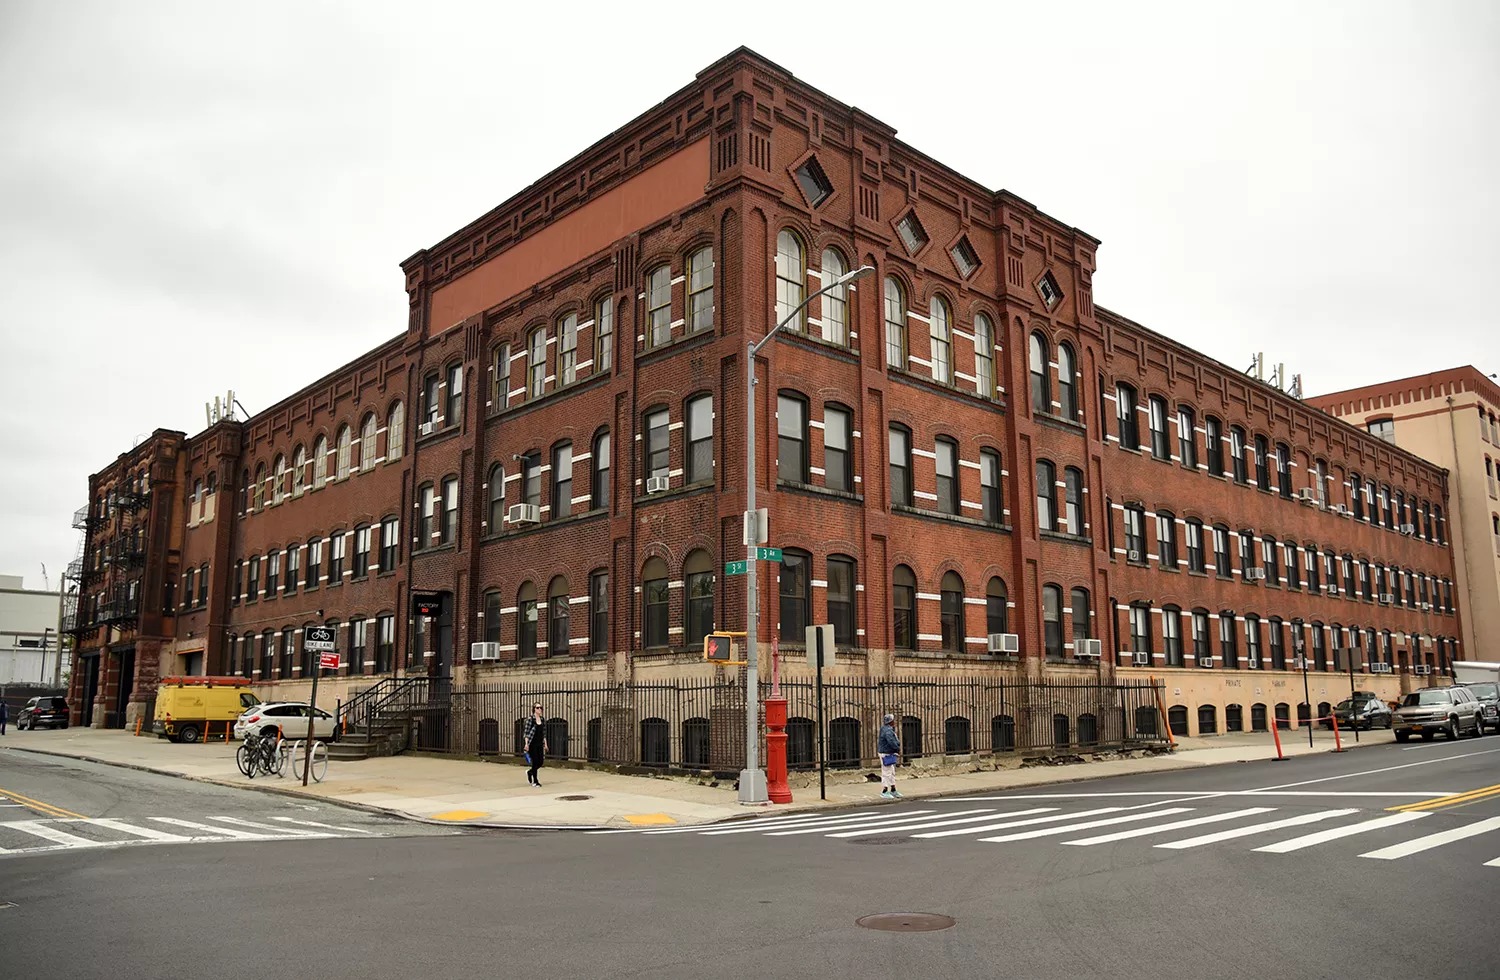 A four story red brick building that once served as a hub of manufacturing in Gowanus.